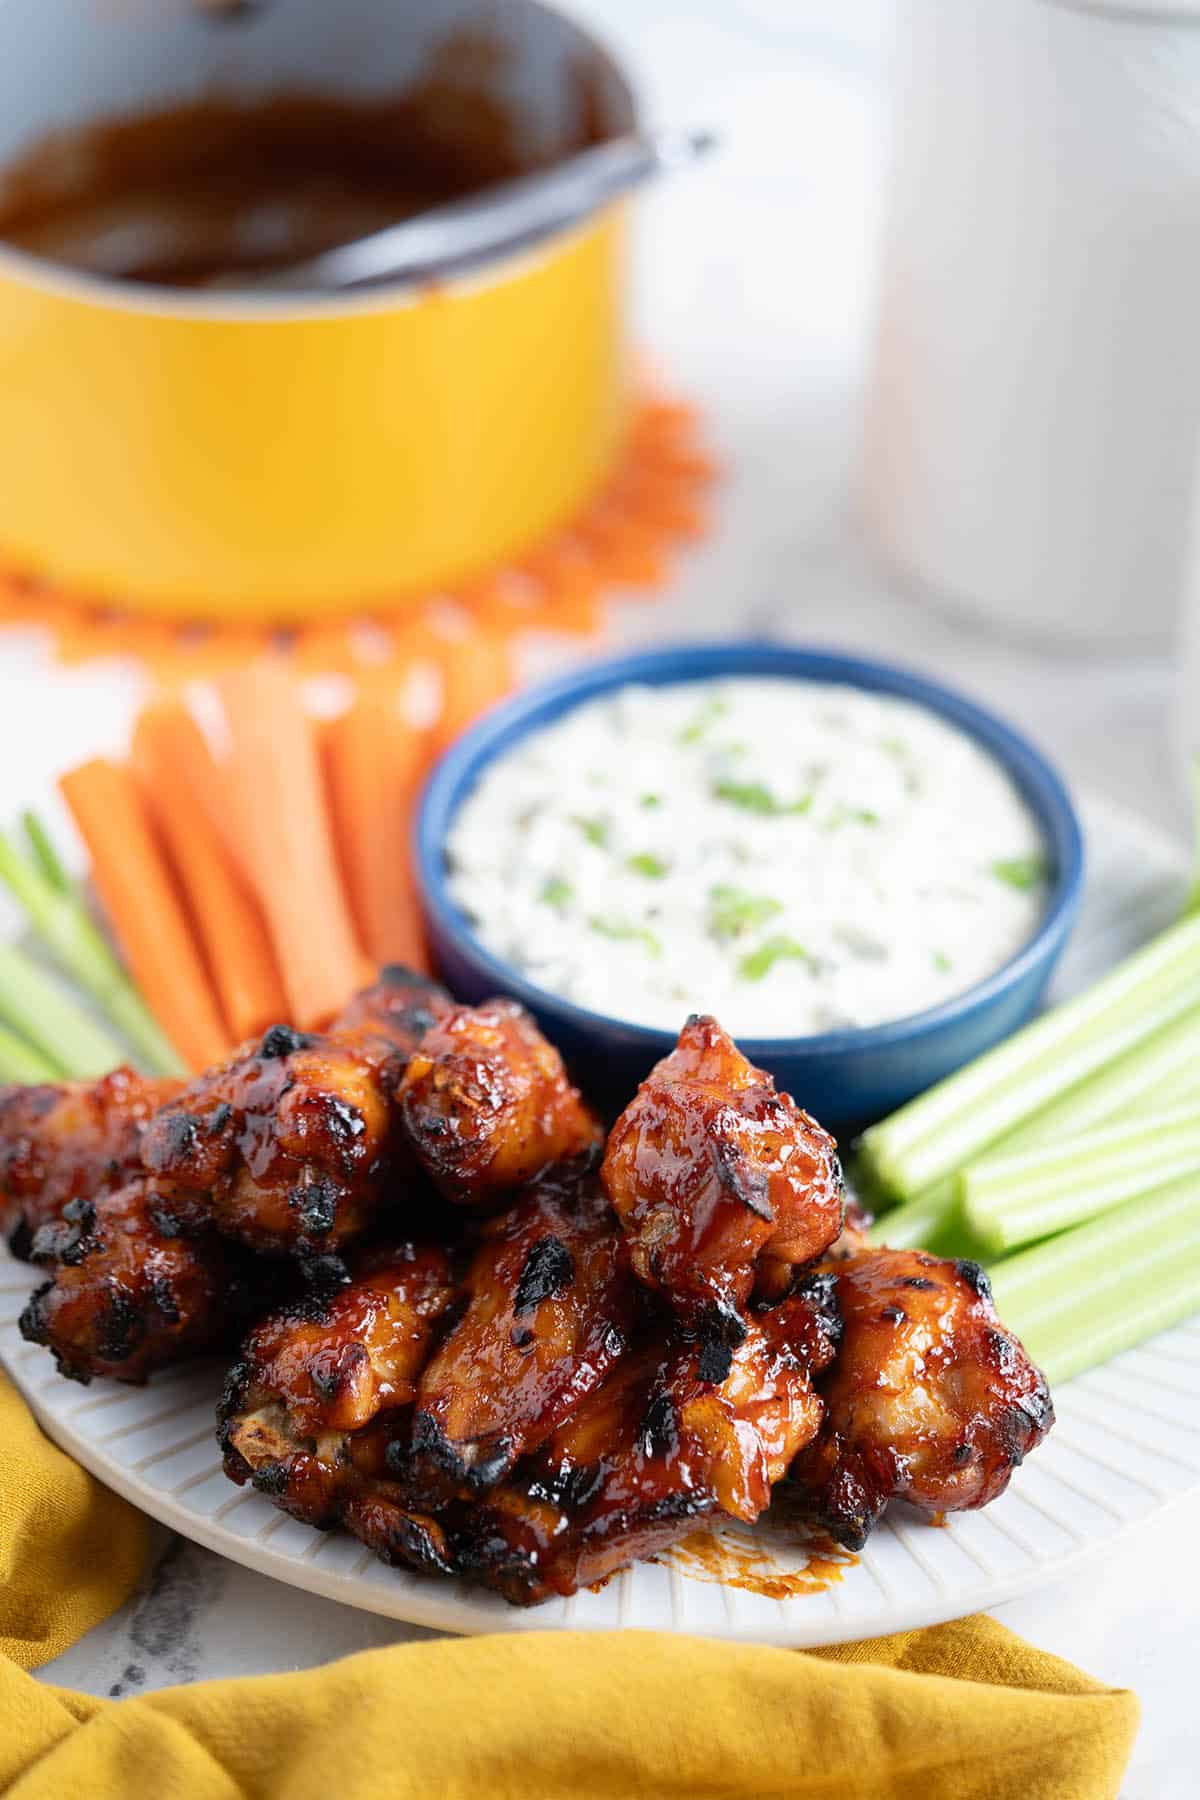 Sticky bbq chicken wings, sliced carrots and celery on a platter with blue cheese dip.